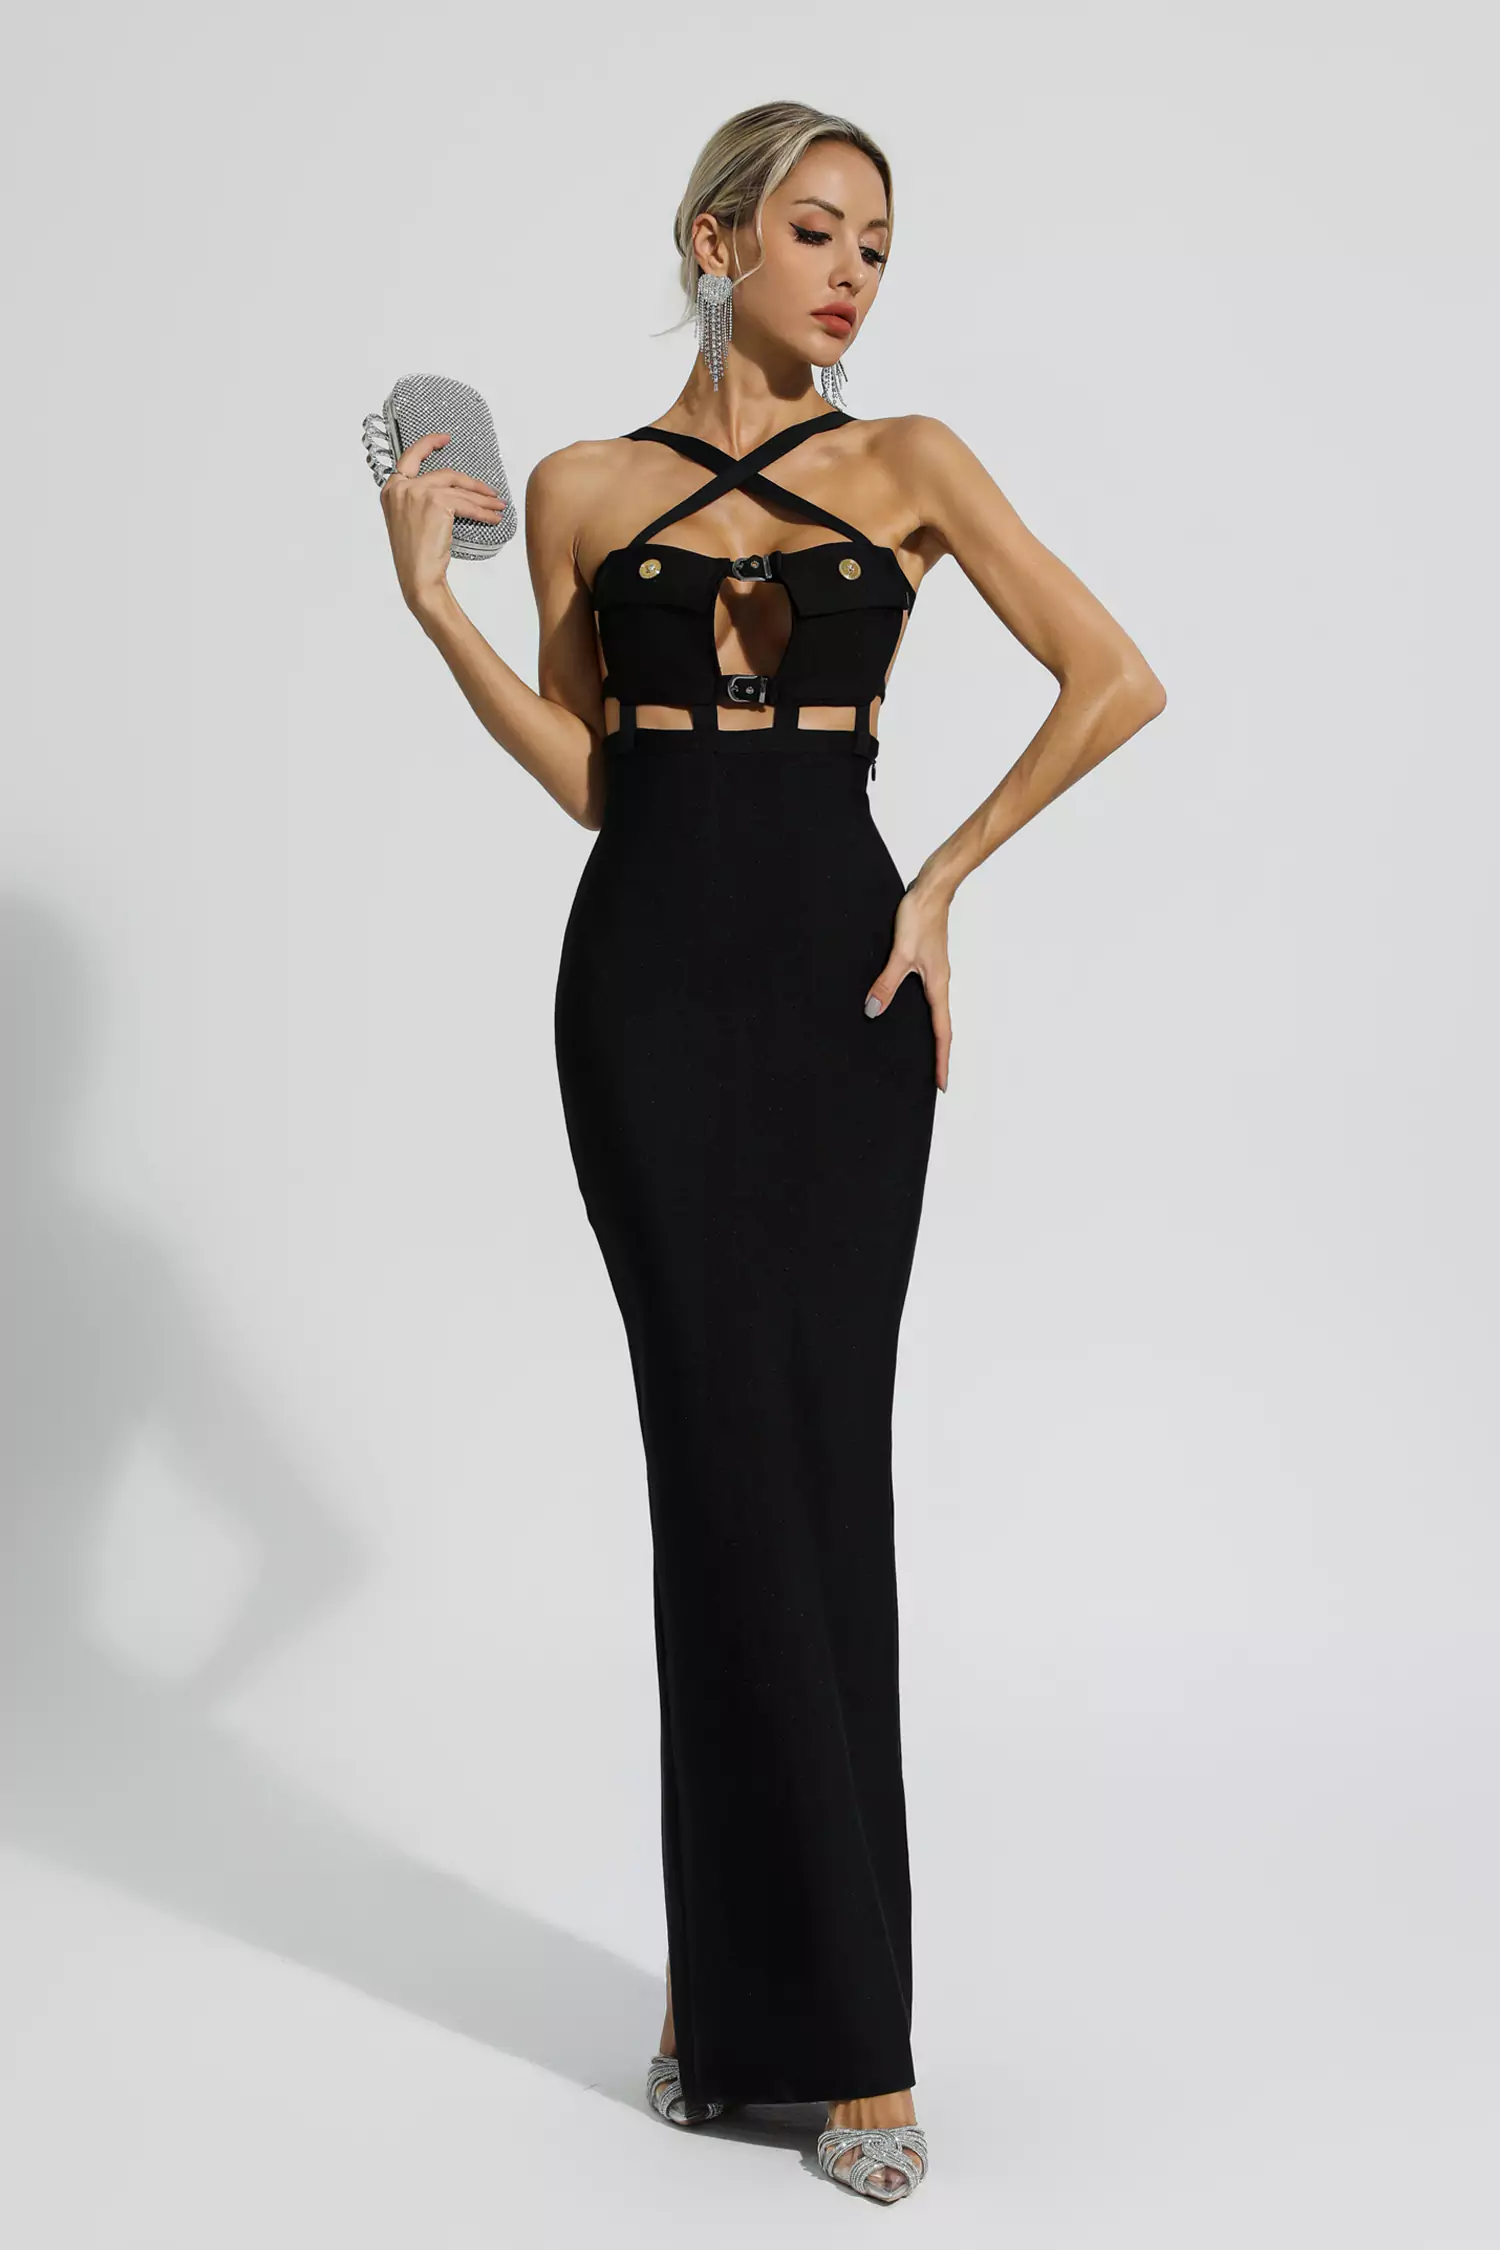 Chic Black Bandage Two Piece Set For Women Black Skirt Outfits And Top For  Evening Parties And Special Occasions Long Sleeve Flare Dress 210525 From  Luo02, $19.57